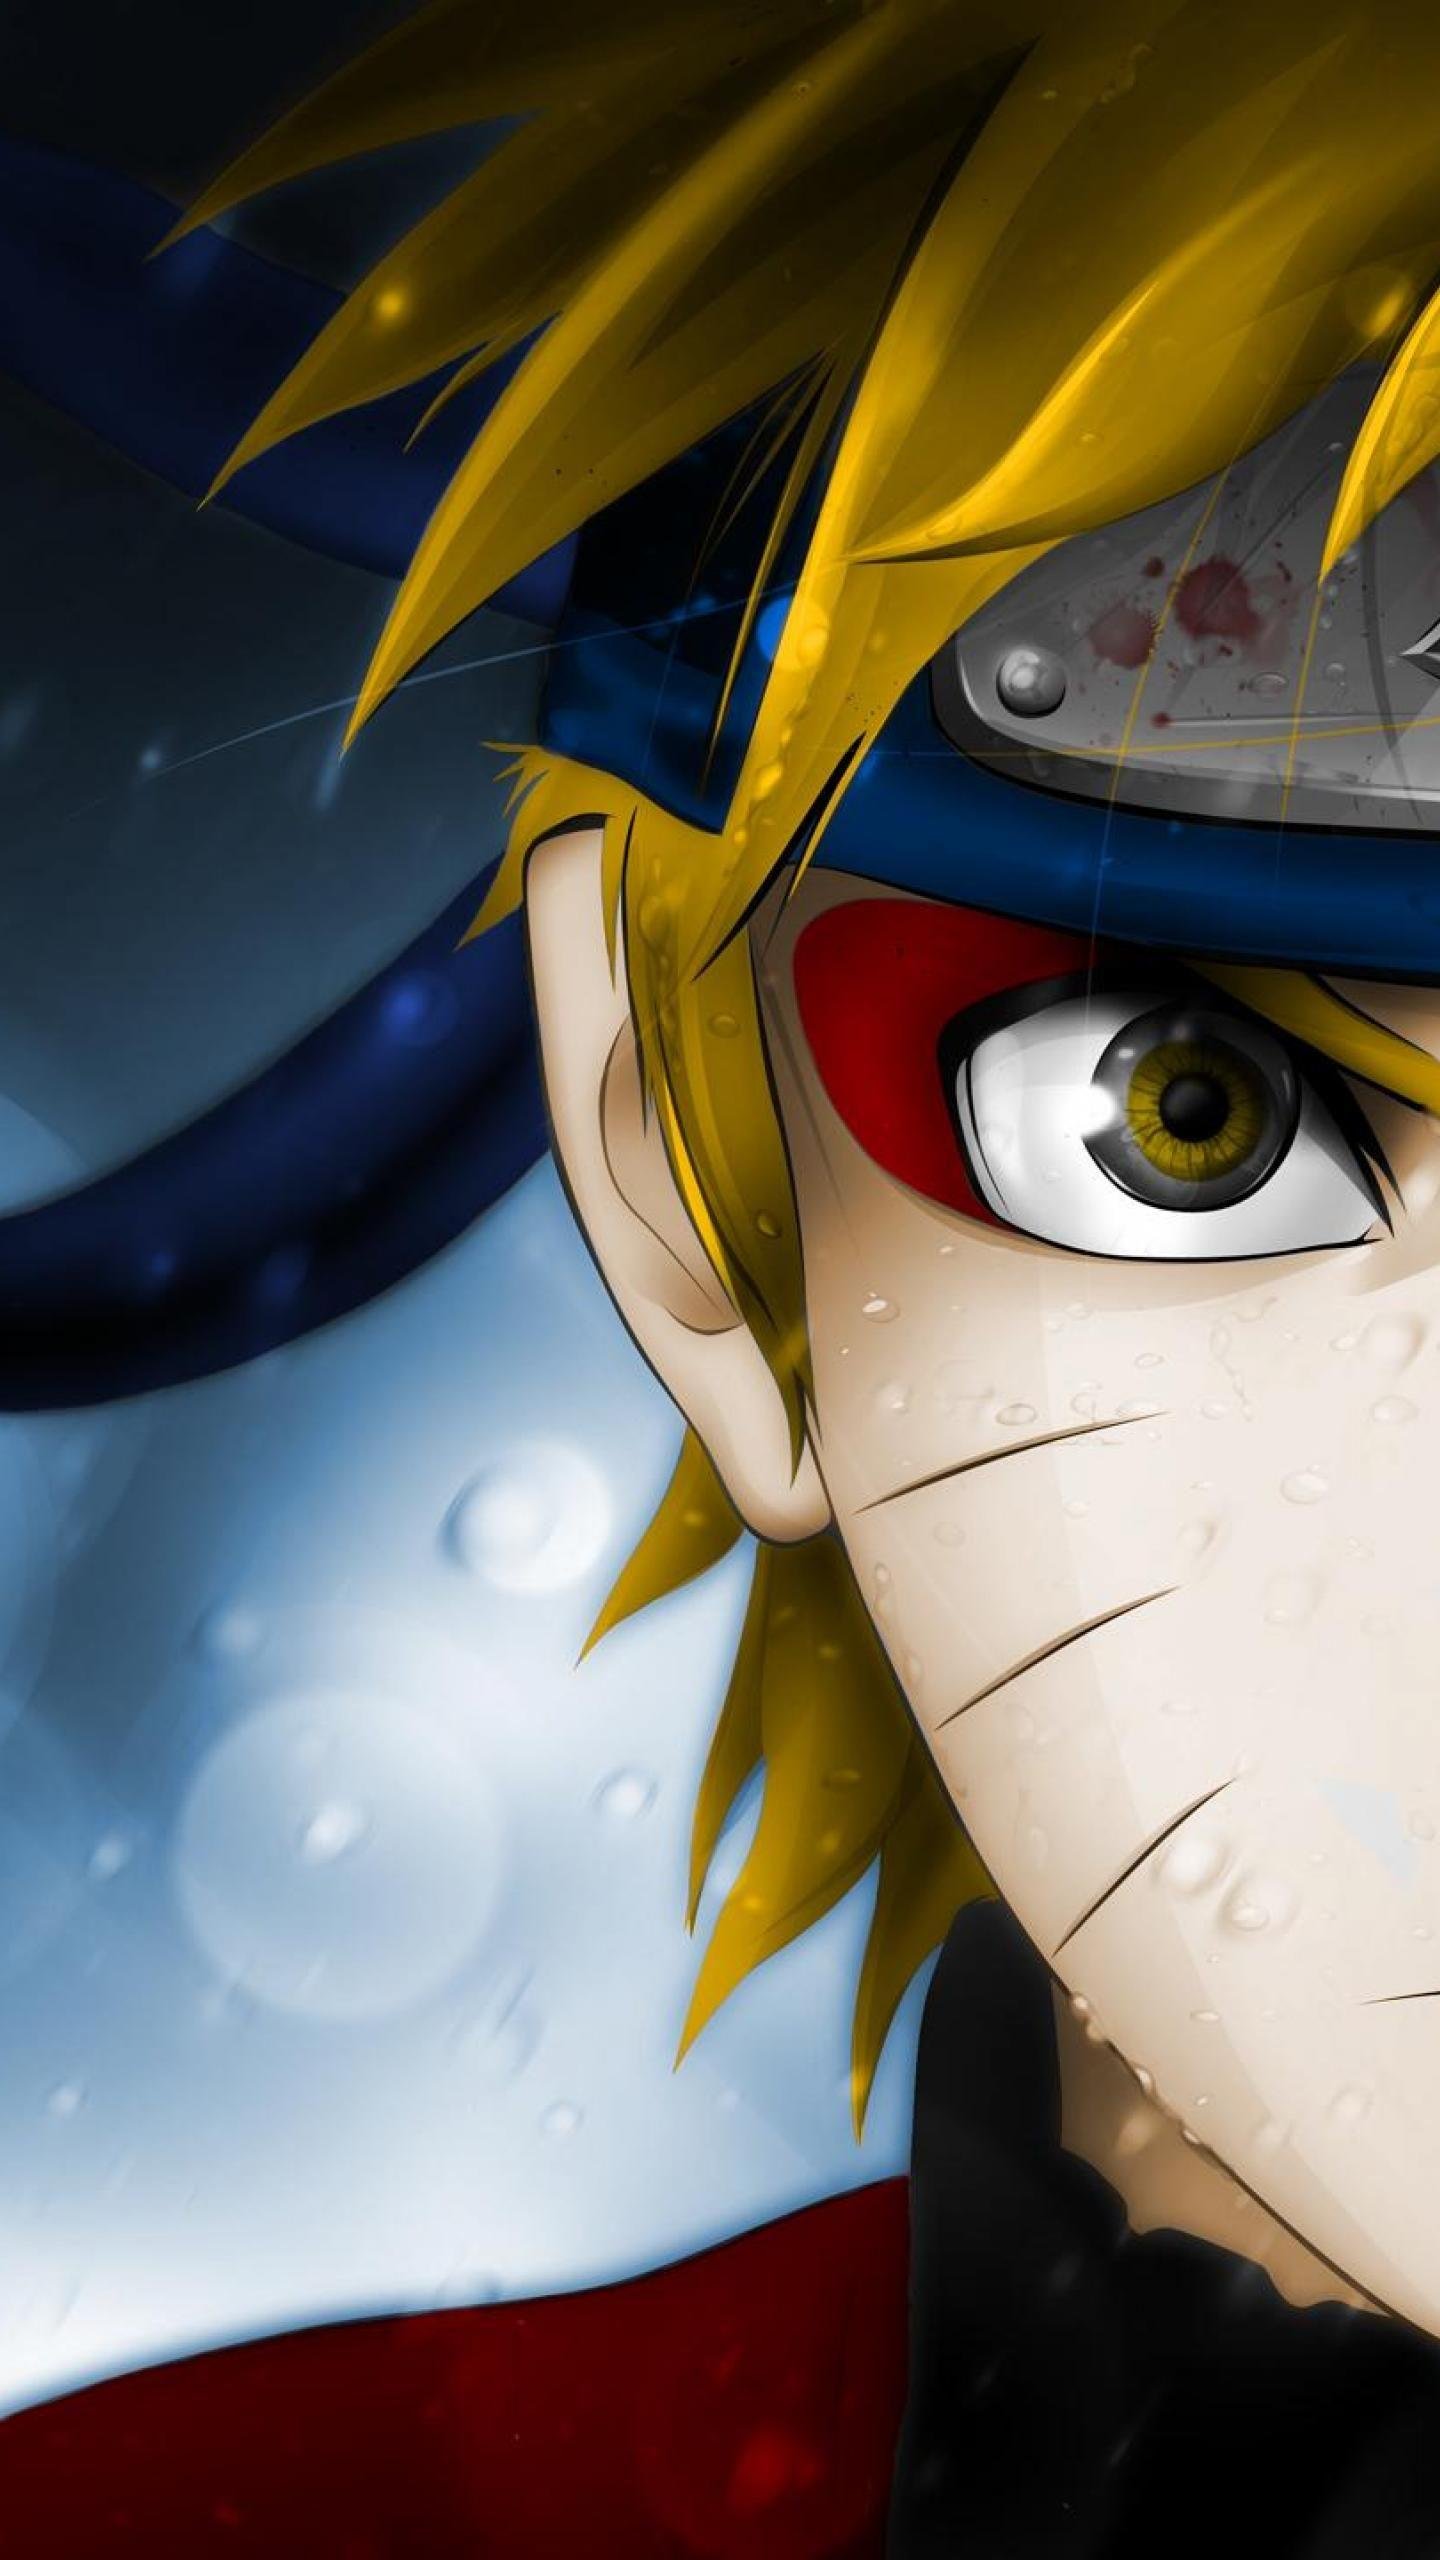 Angry Naruto Face by Mearicksart on DeviantArt